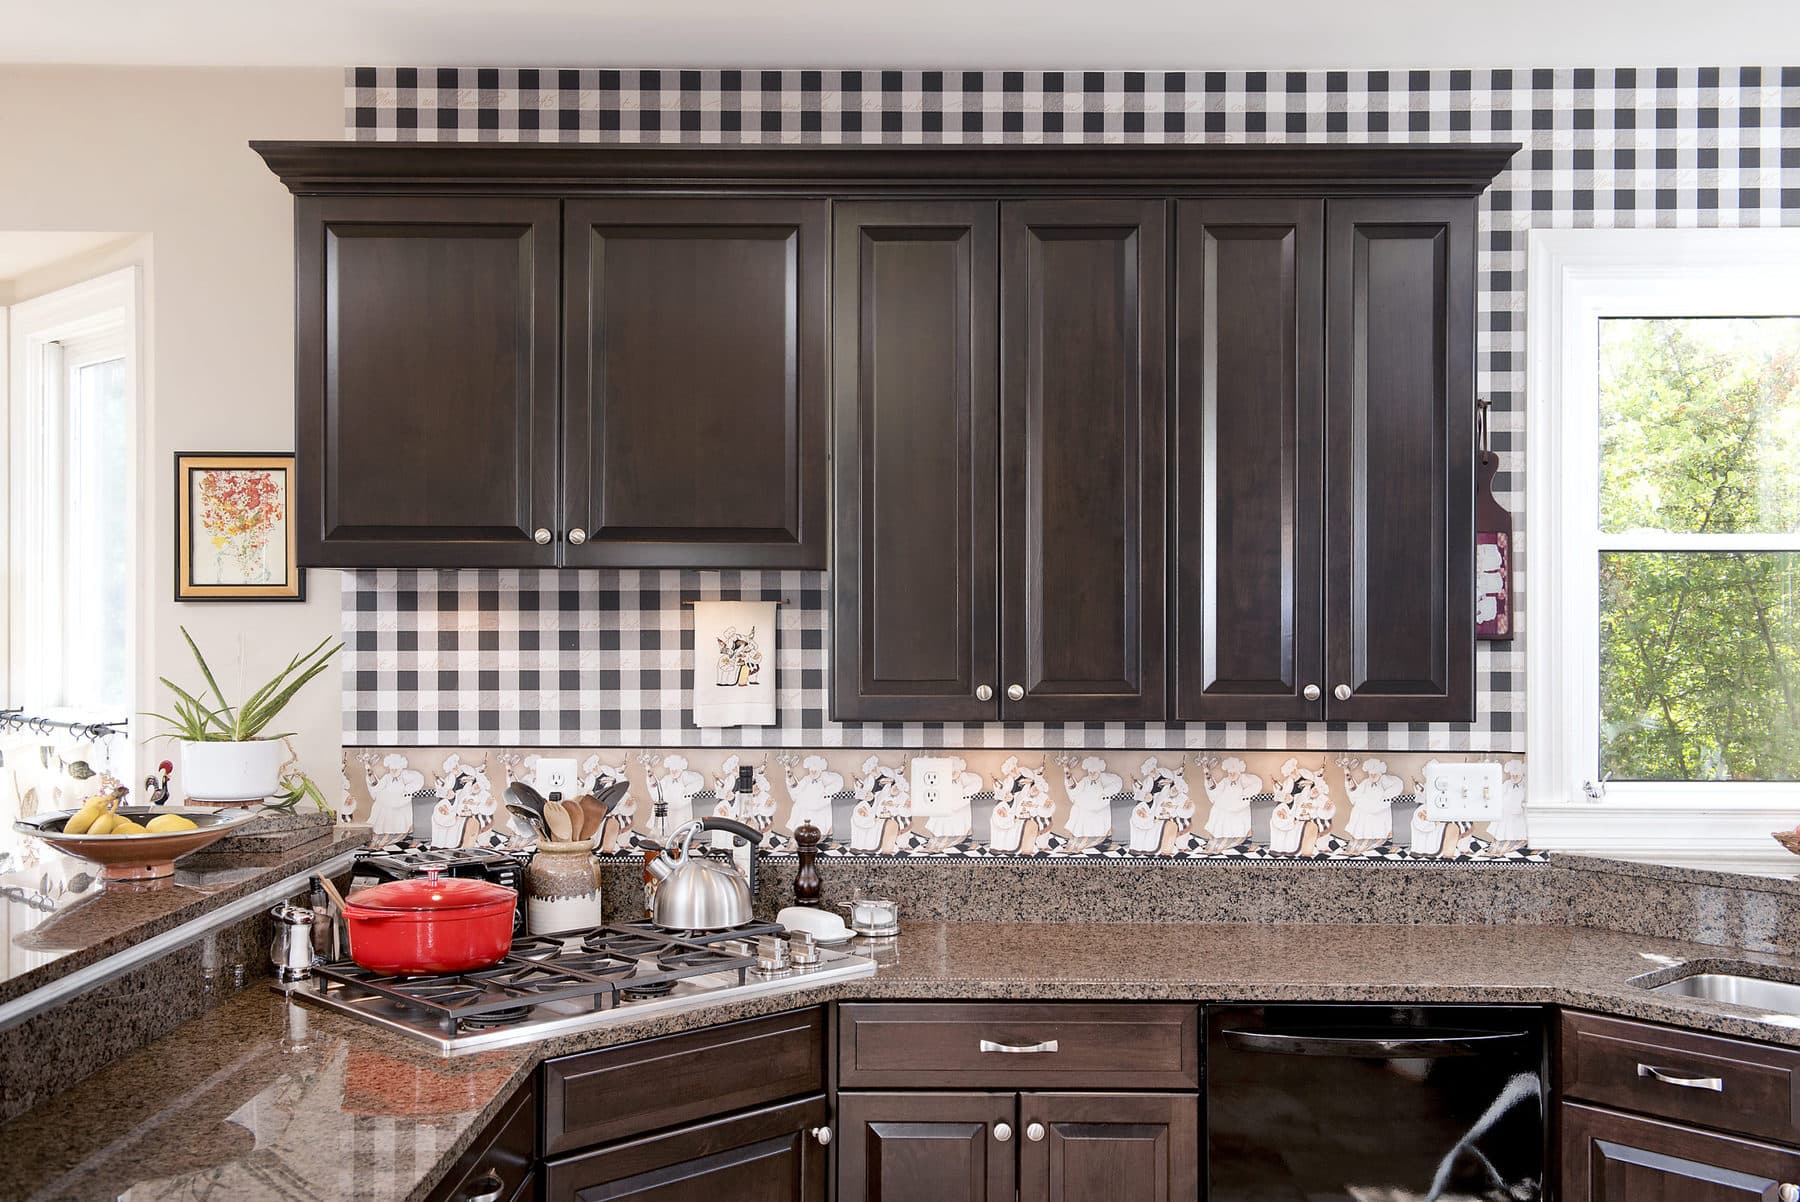 Refacing Kitchen Cabinets Cleveland Oh